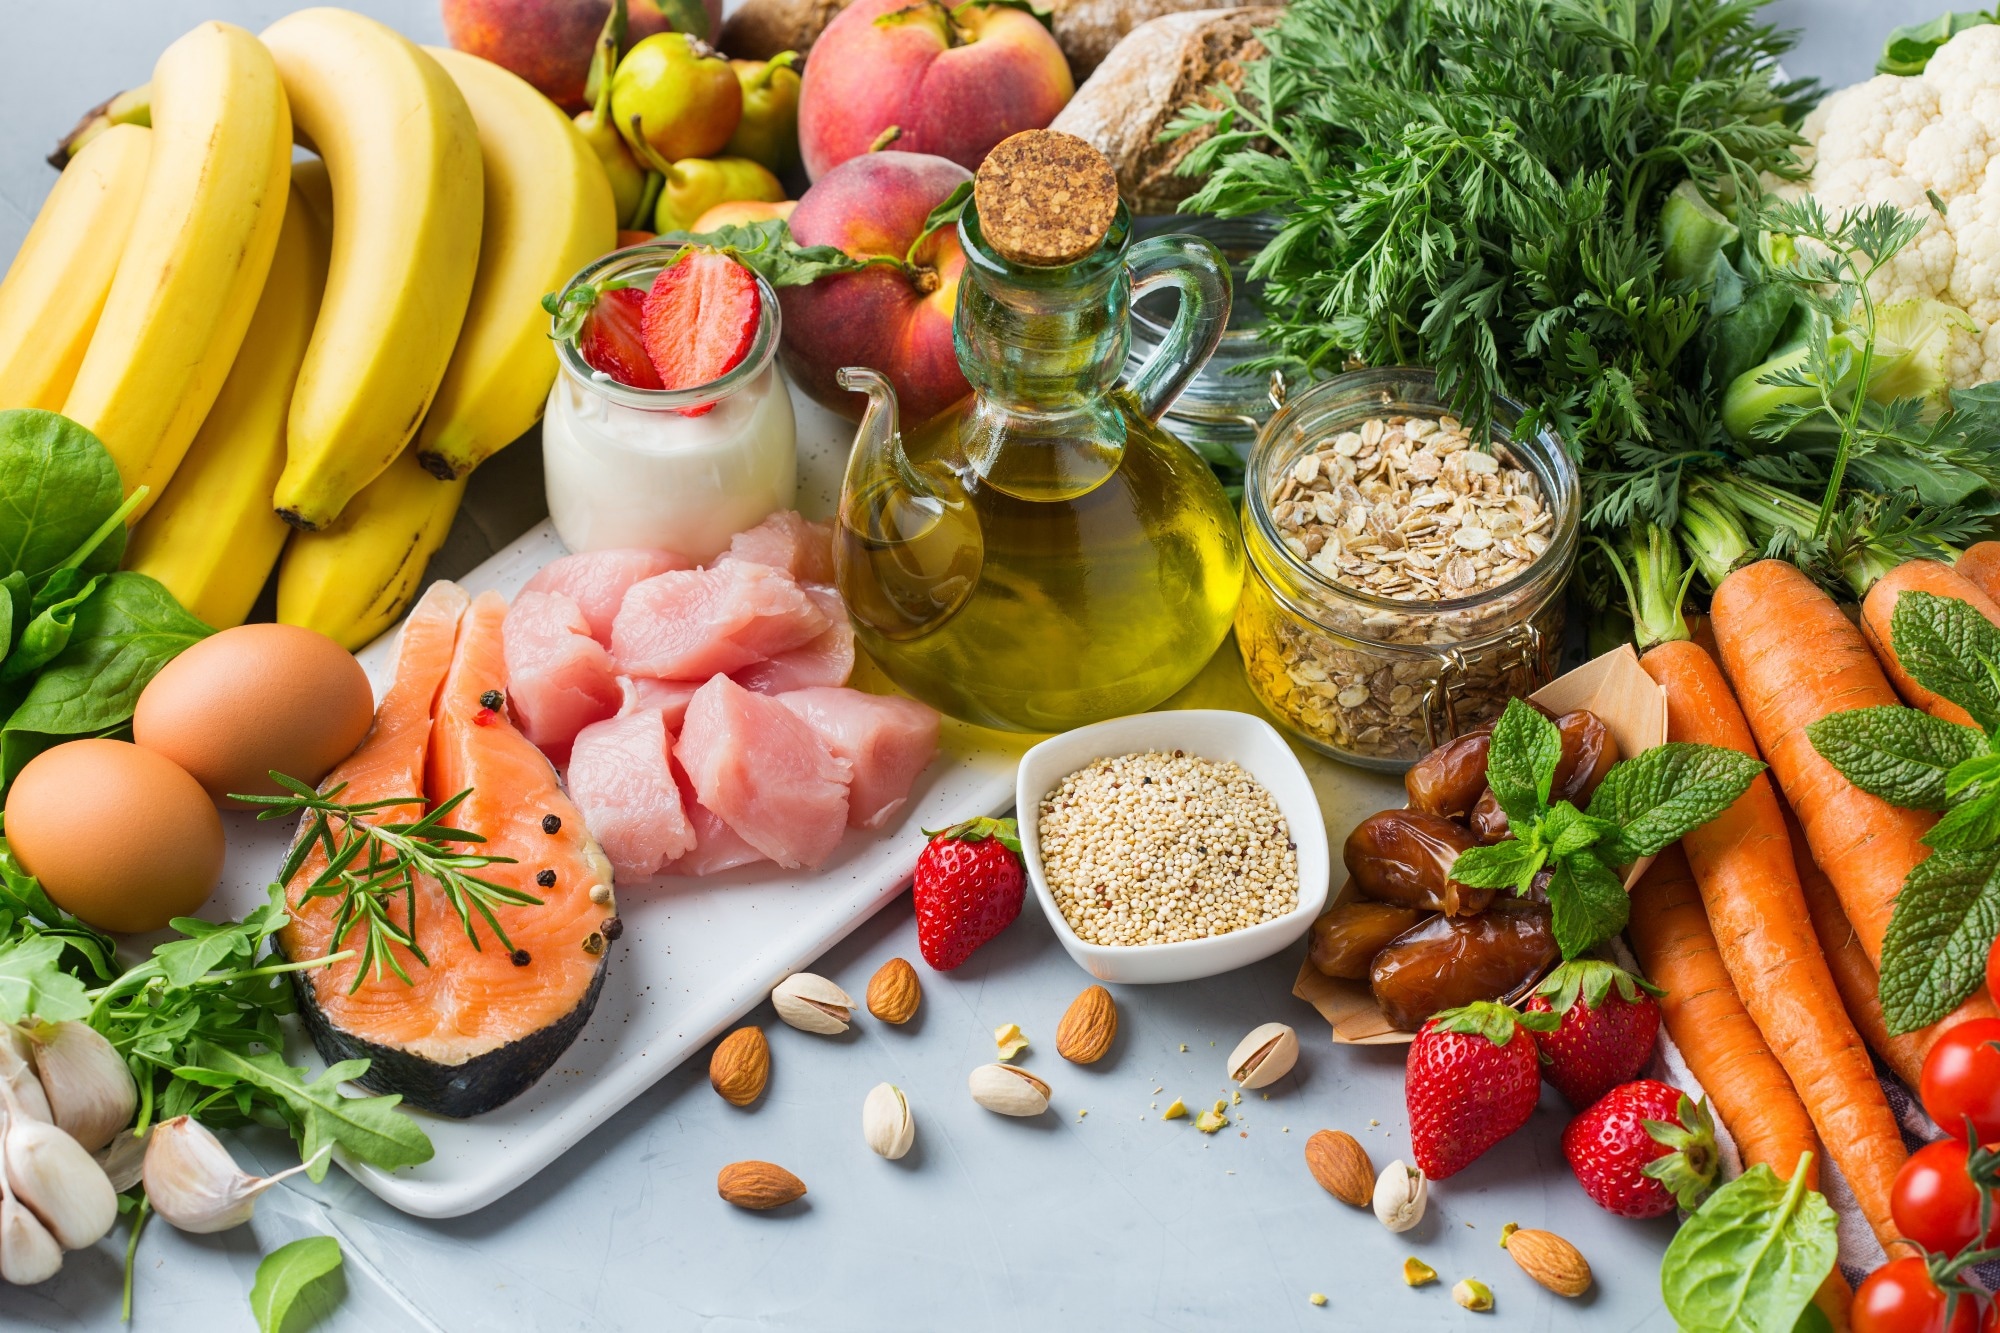 Study: Adapted Mindfulness Training for Interoception and Adherence to the DASH Diet. Image Credit: Antonina Vlasova/Shutterstock.com